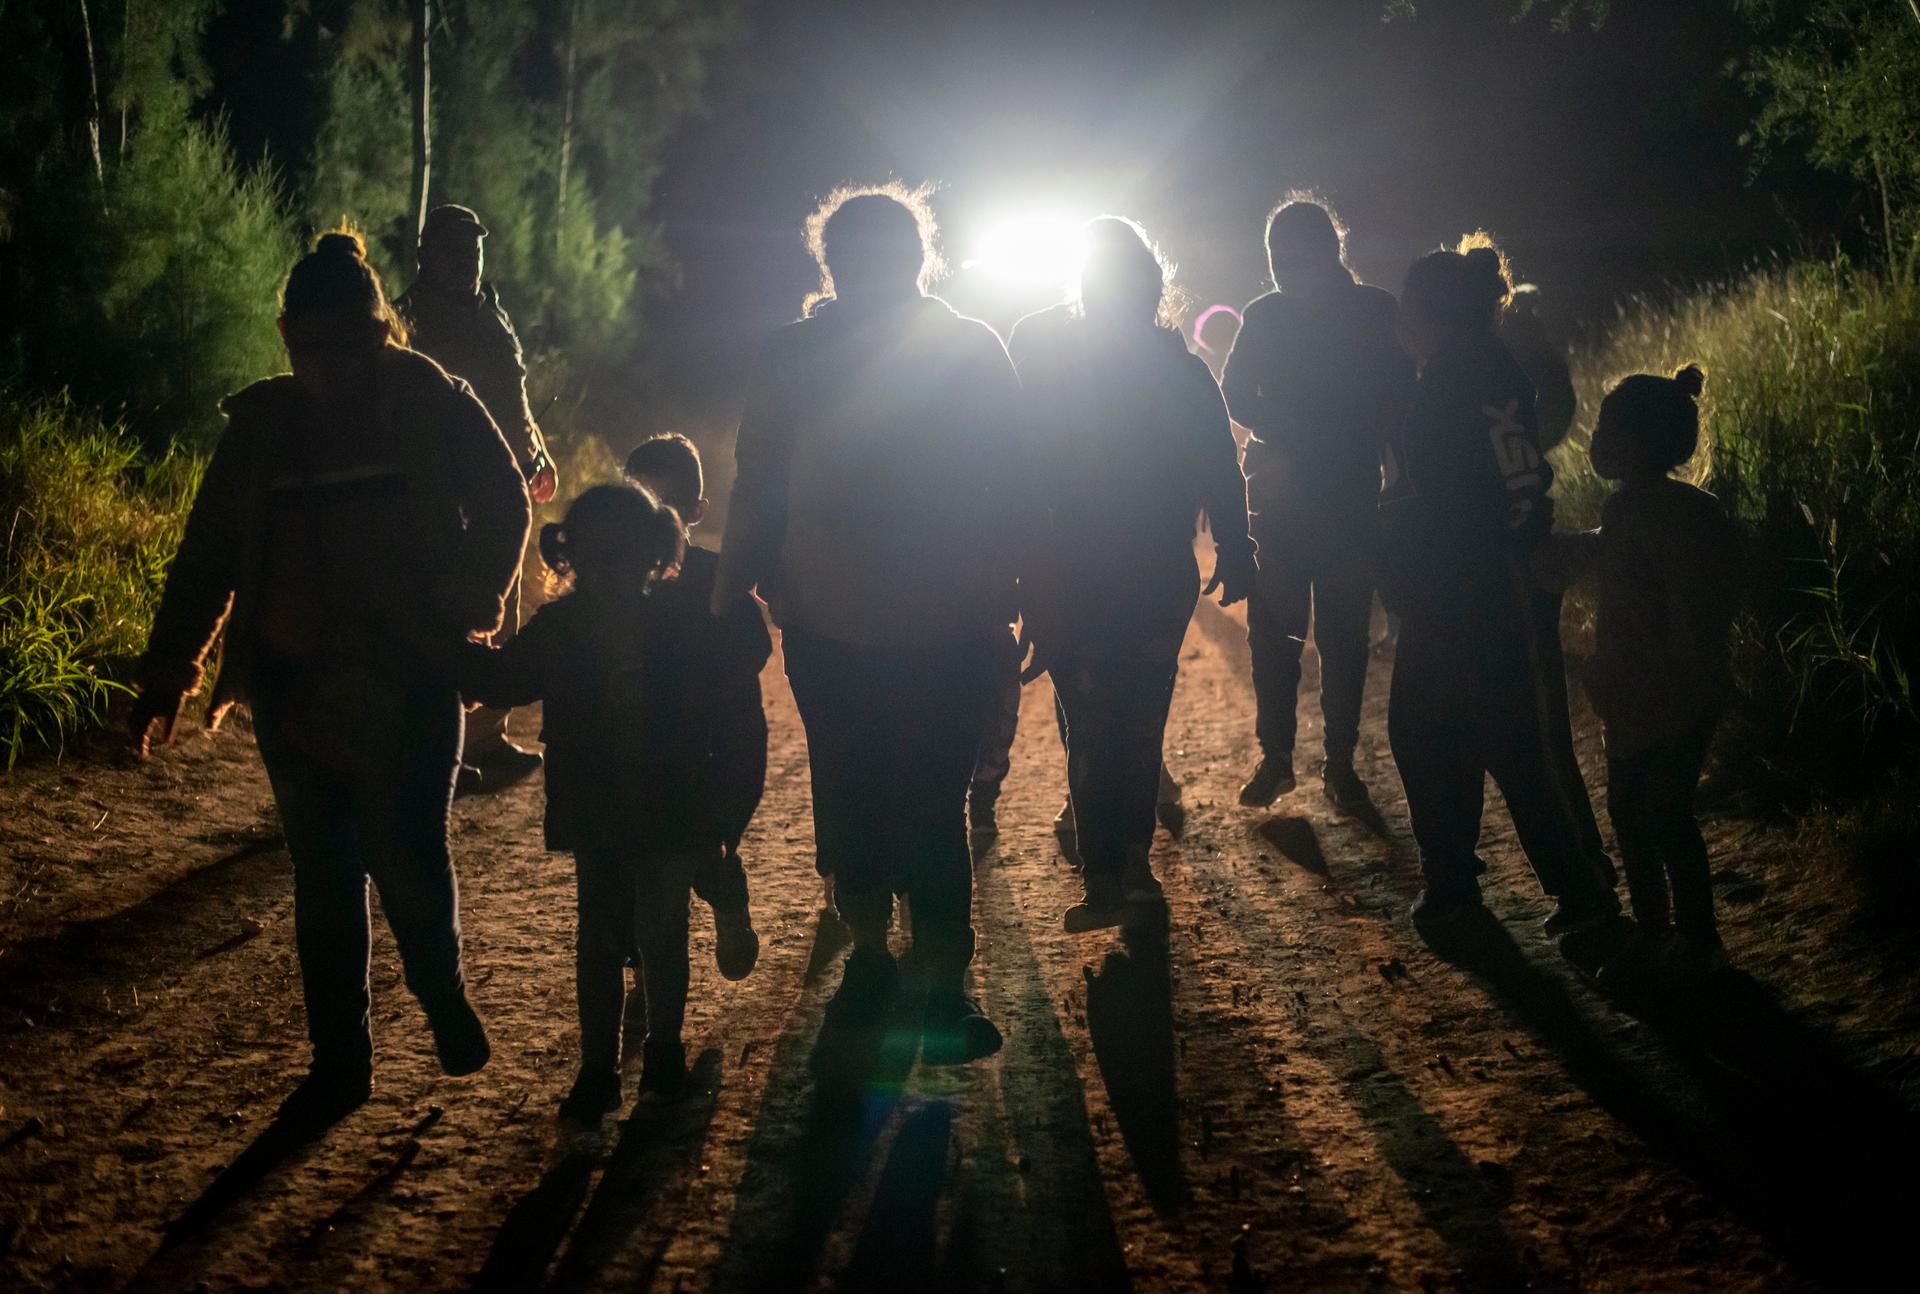 A group of noncitizens crossing the border at night, silhouetted against a light